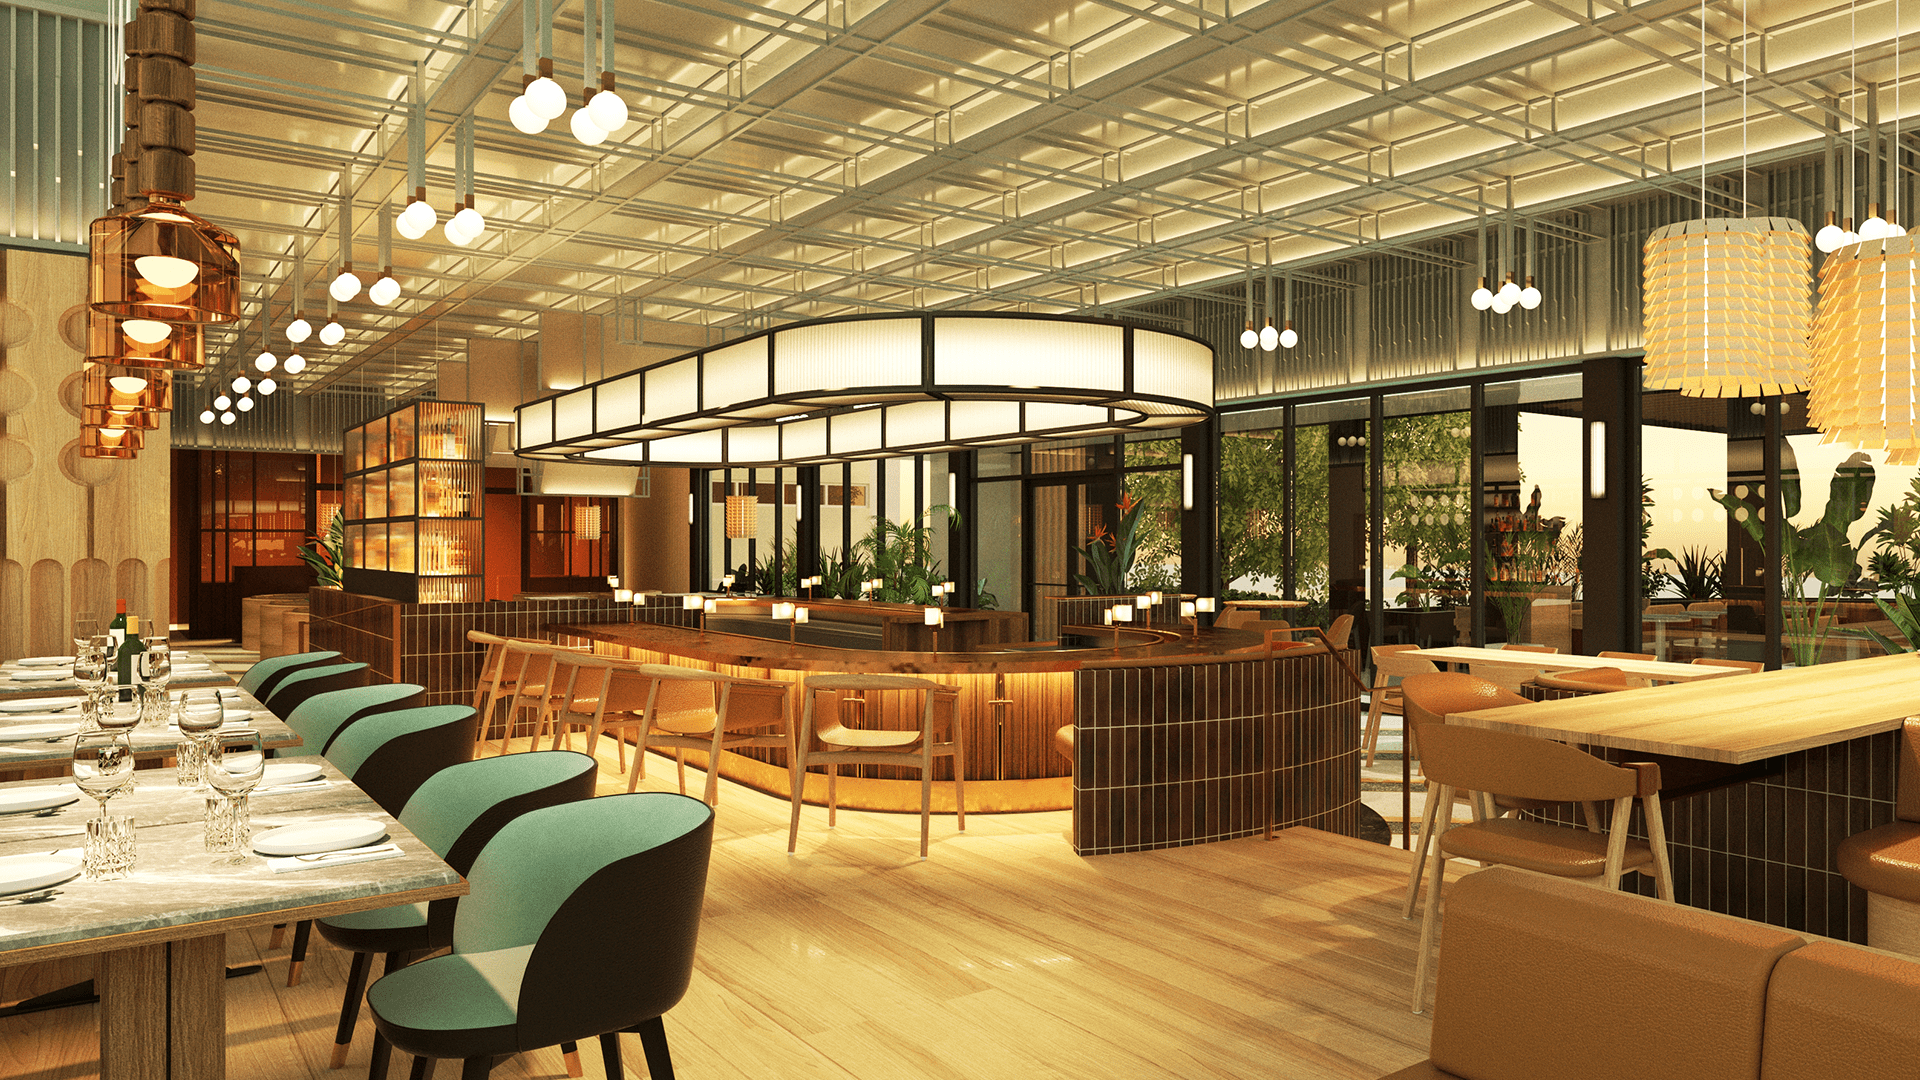 rendering of a well lit cocktail bar and steak house. An oval shaped bar. Multiple tables set up with green chairs.